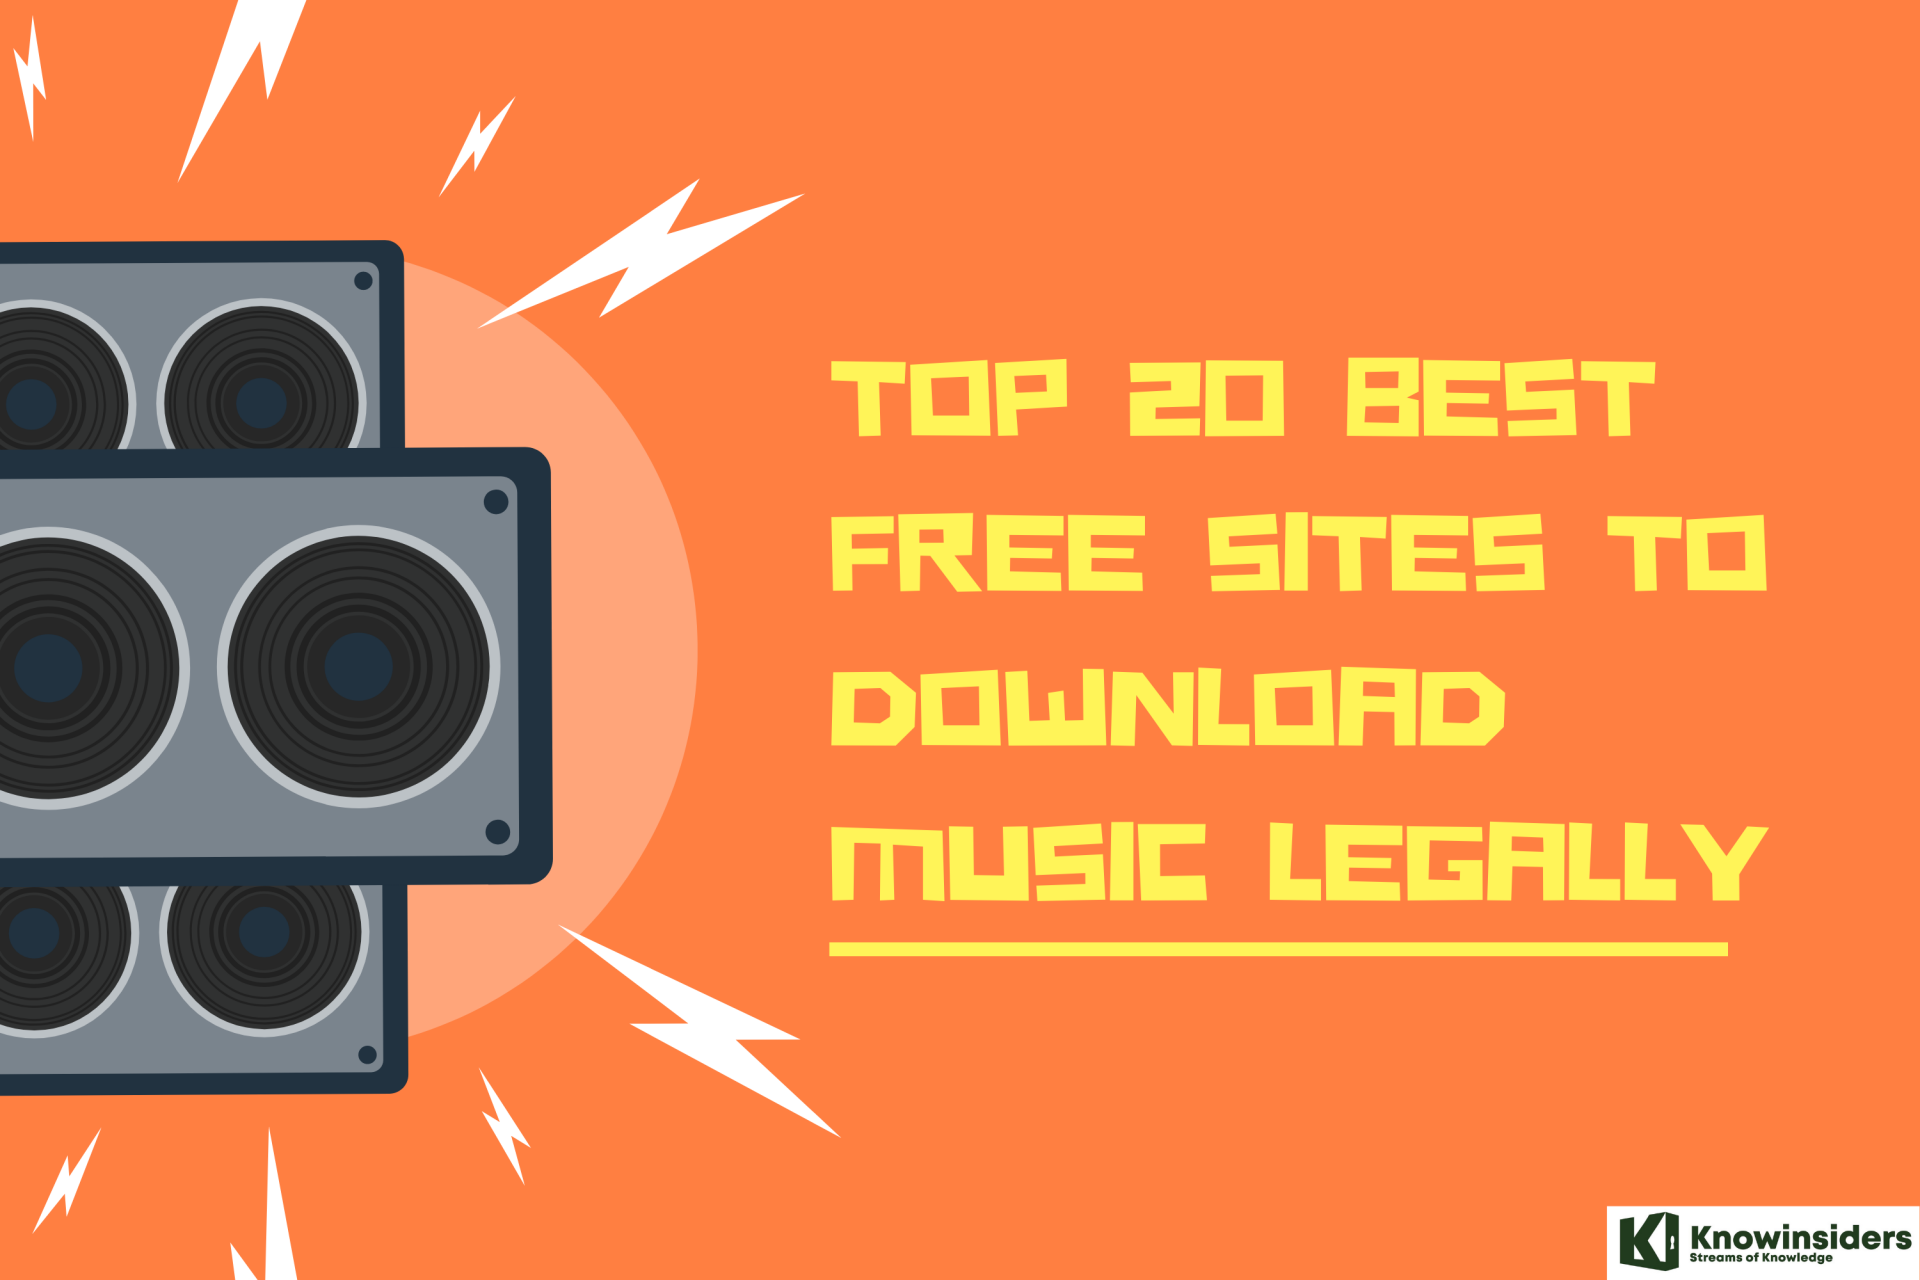 free legal music download sites for computer